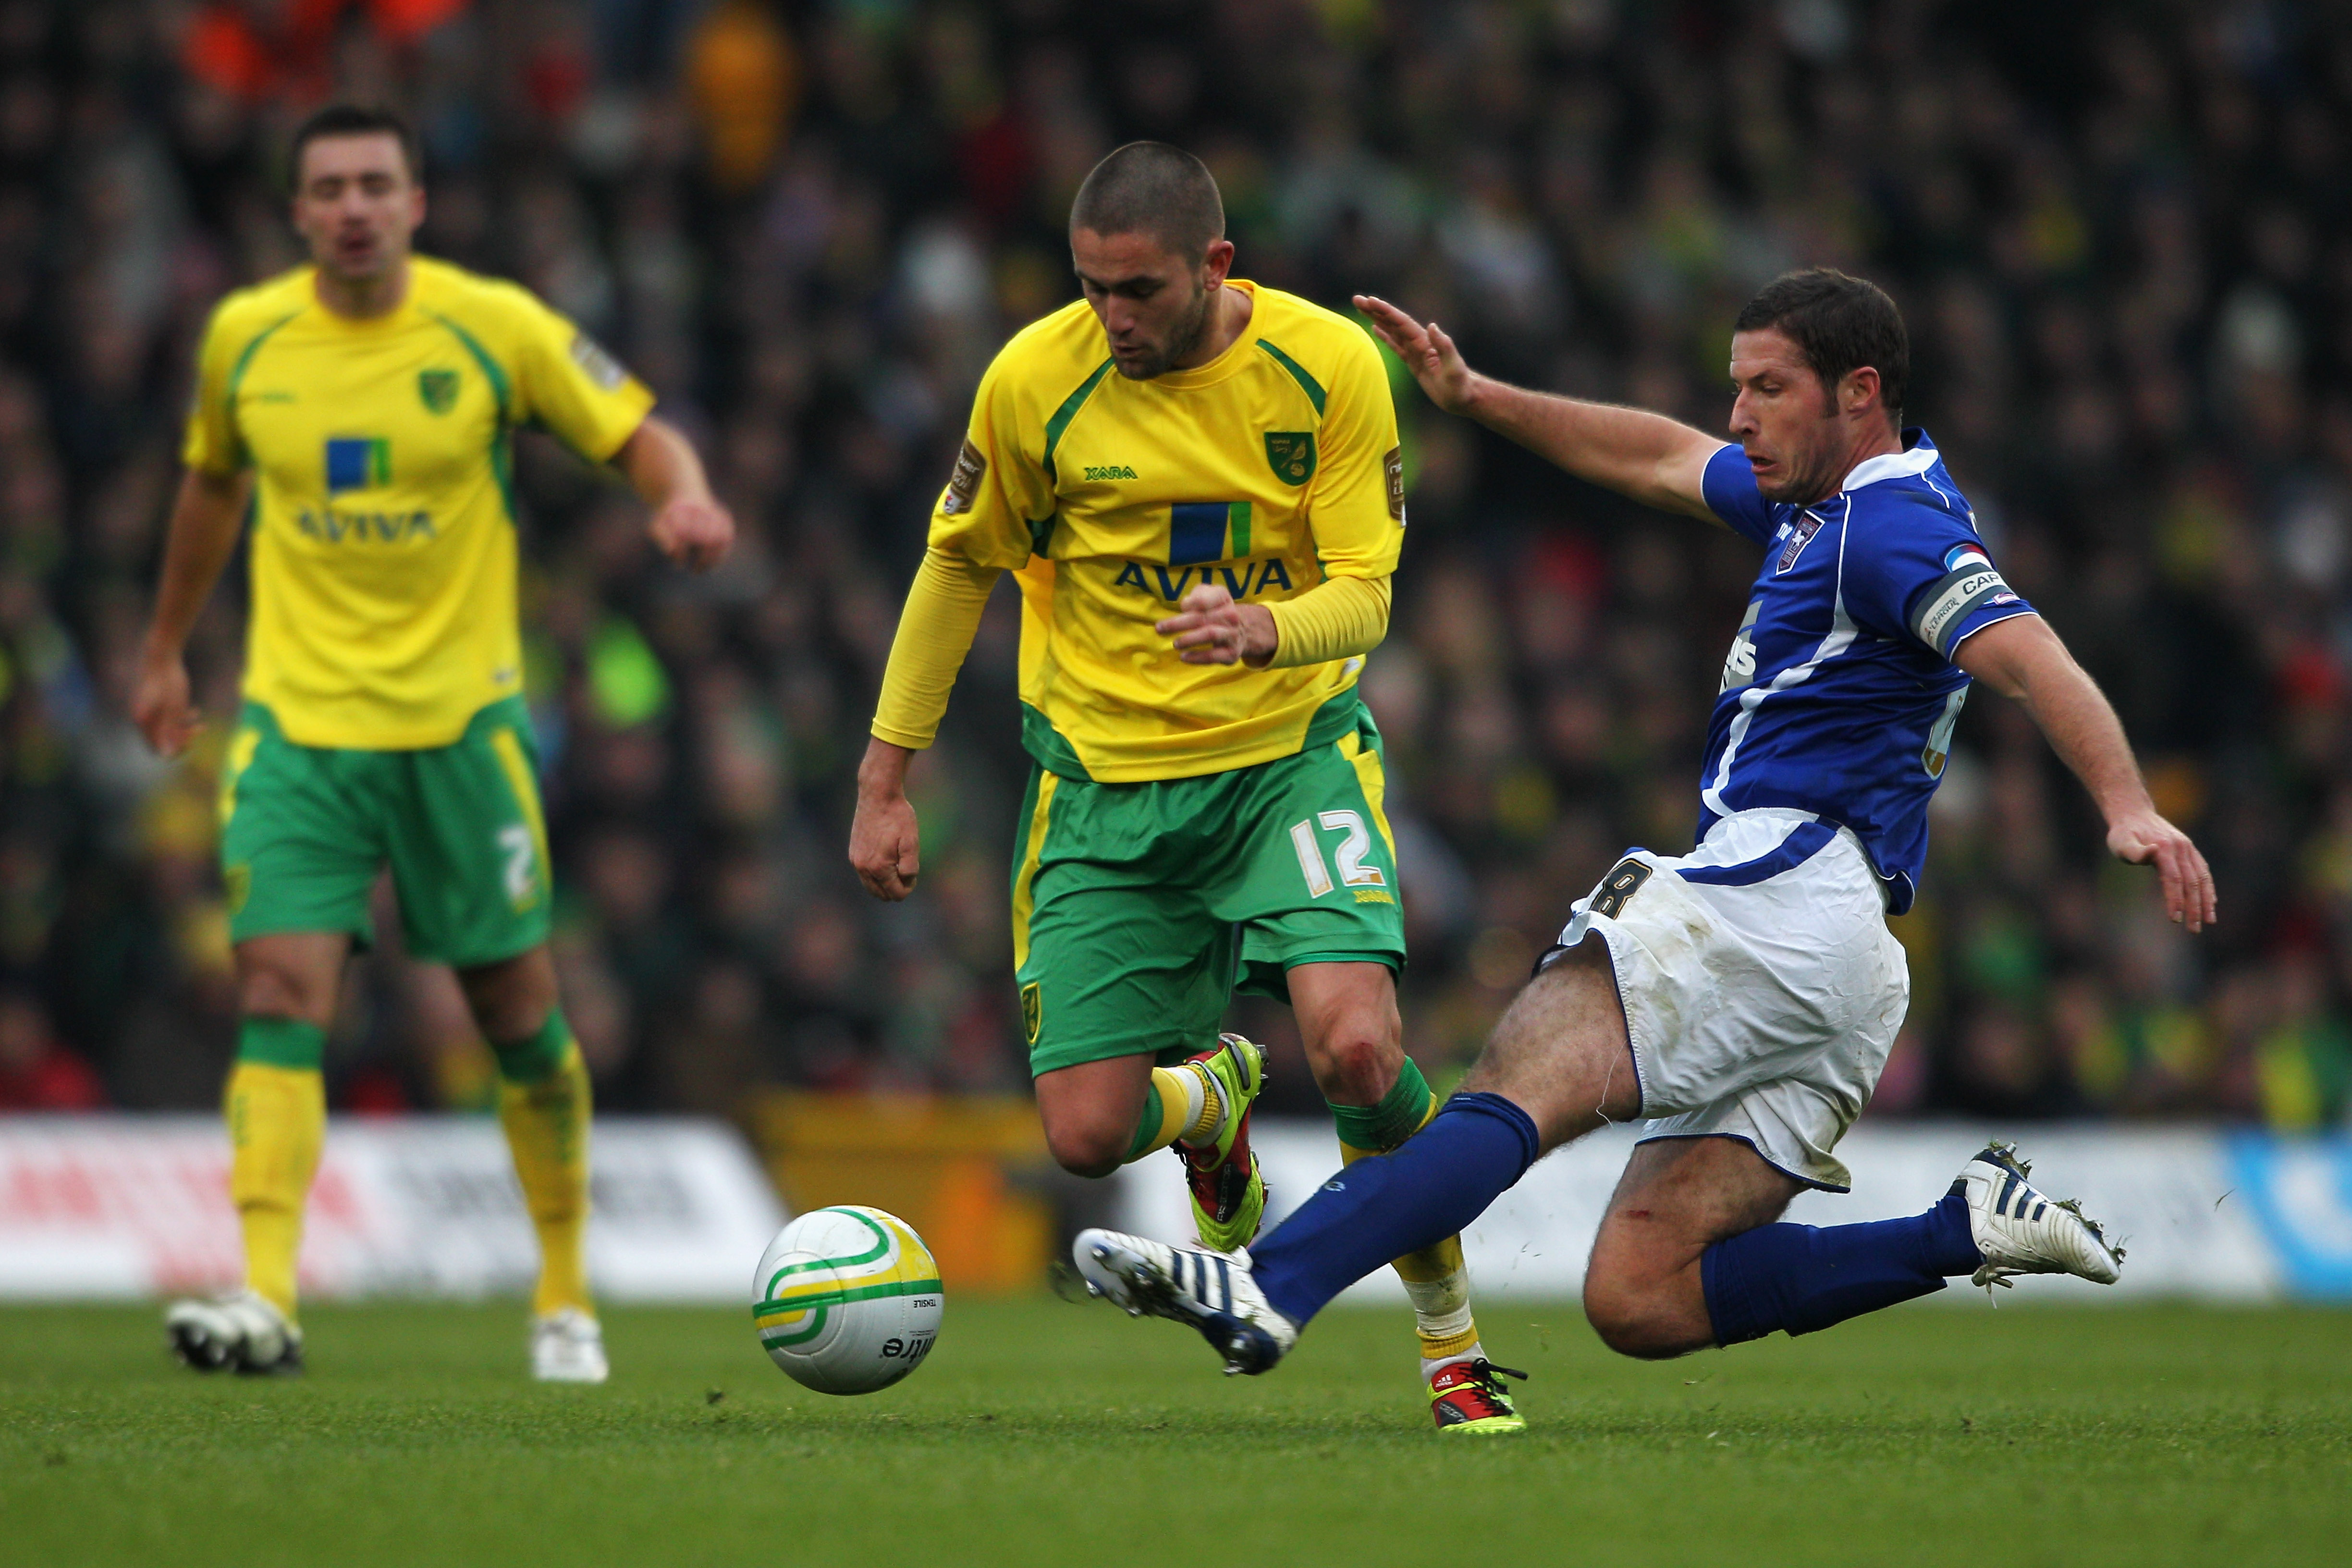 NORWICH, ENGLAND - NOVEMBER 28:  Henri Lansbury of Norwich is tackled and fouled by David Norris of Ipswich during the npower Championship match between Norwich City and Ipswich Town at Carrow Road on November 28, 2010 in Norwich, England.  (Photo by Dean